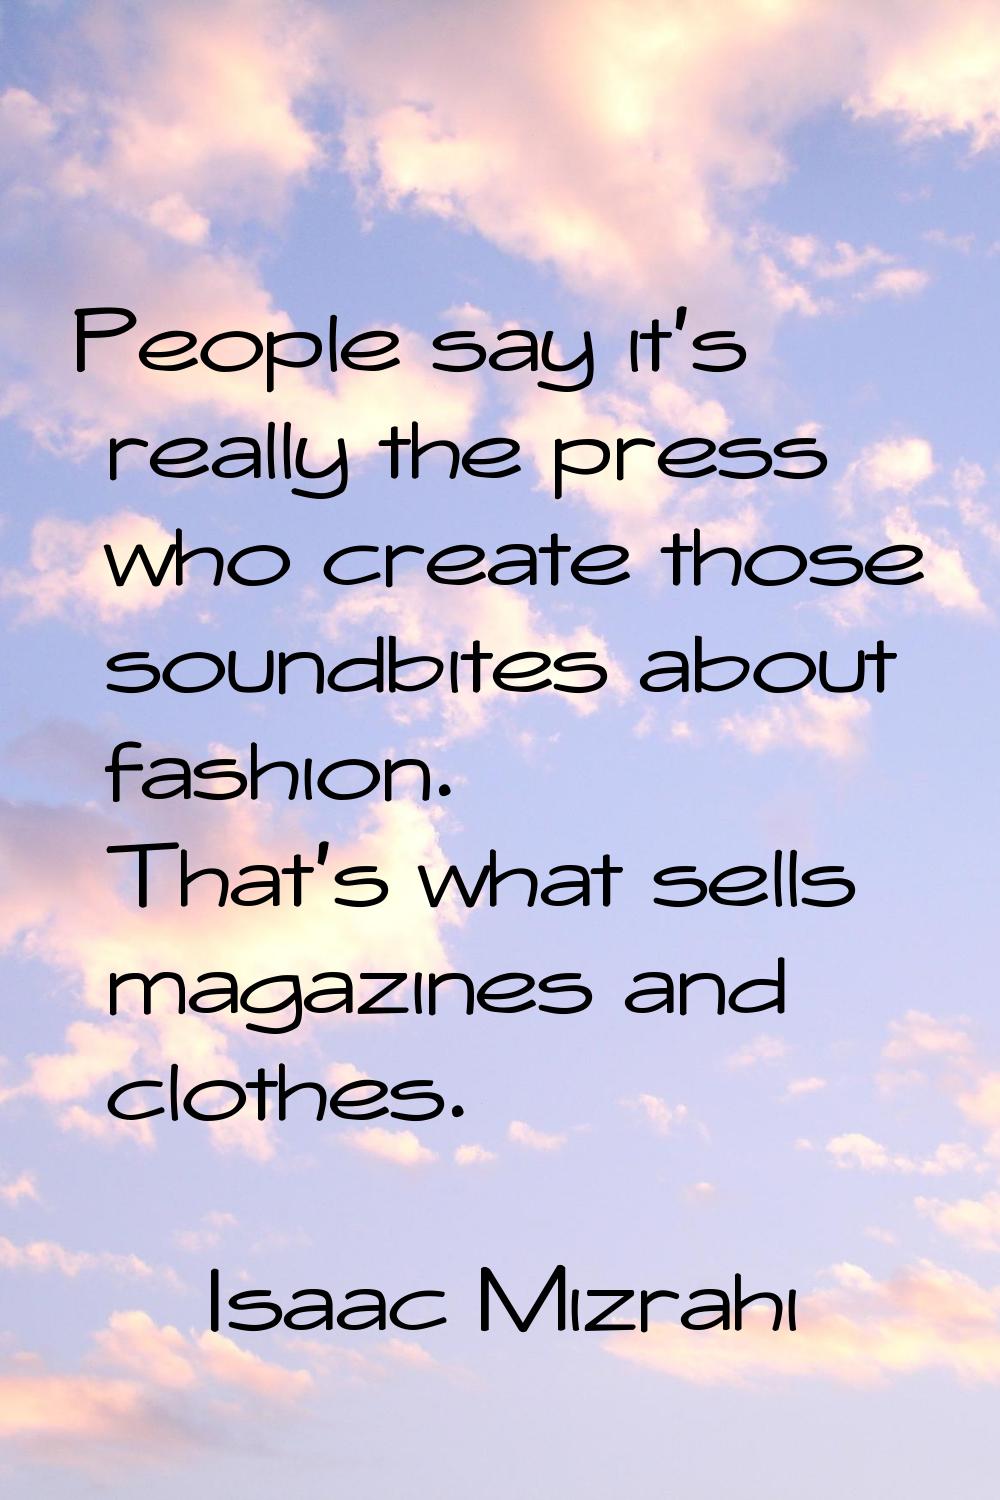 People say it's really the press who create those soundbites about fashion. That's what sells magaz